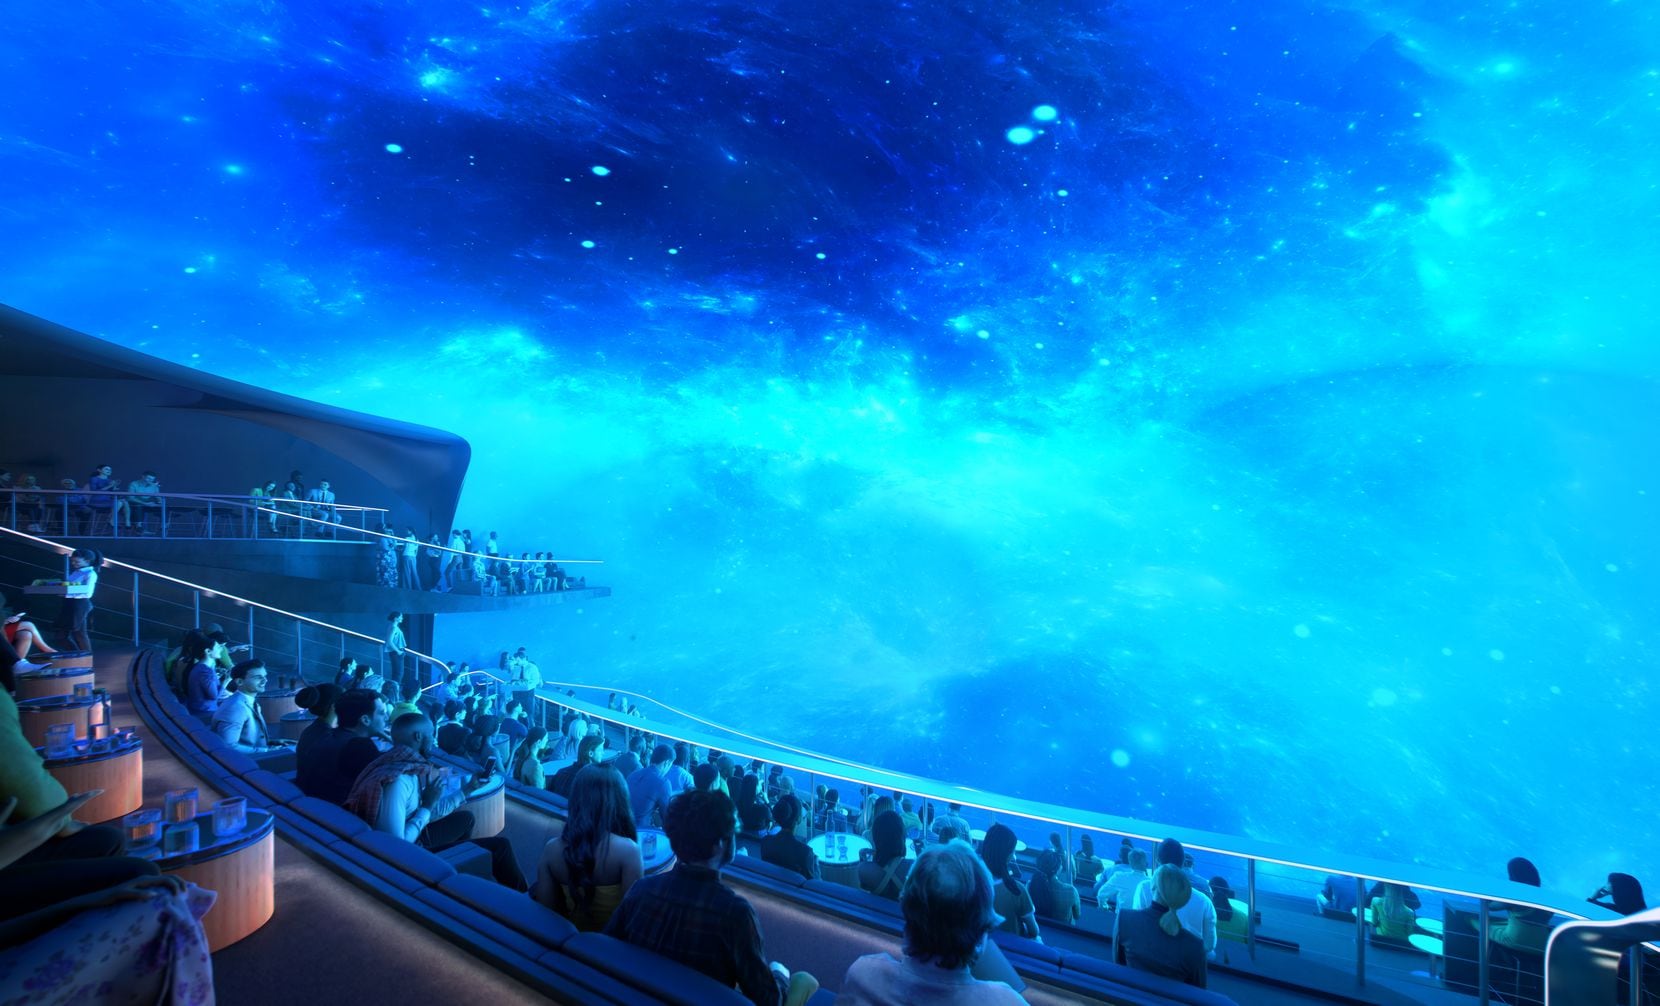 Cosm promises to create immersive experiences that'll make customers feel like they at a...